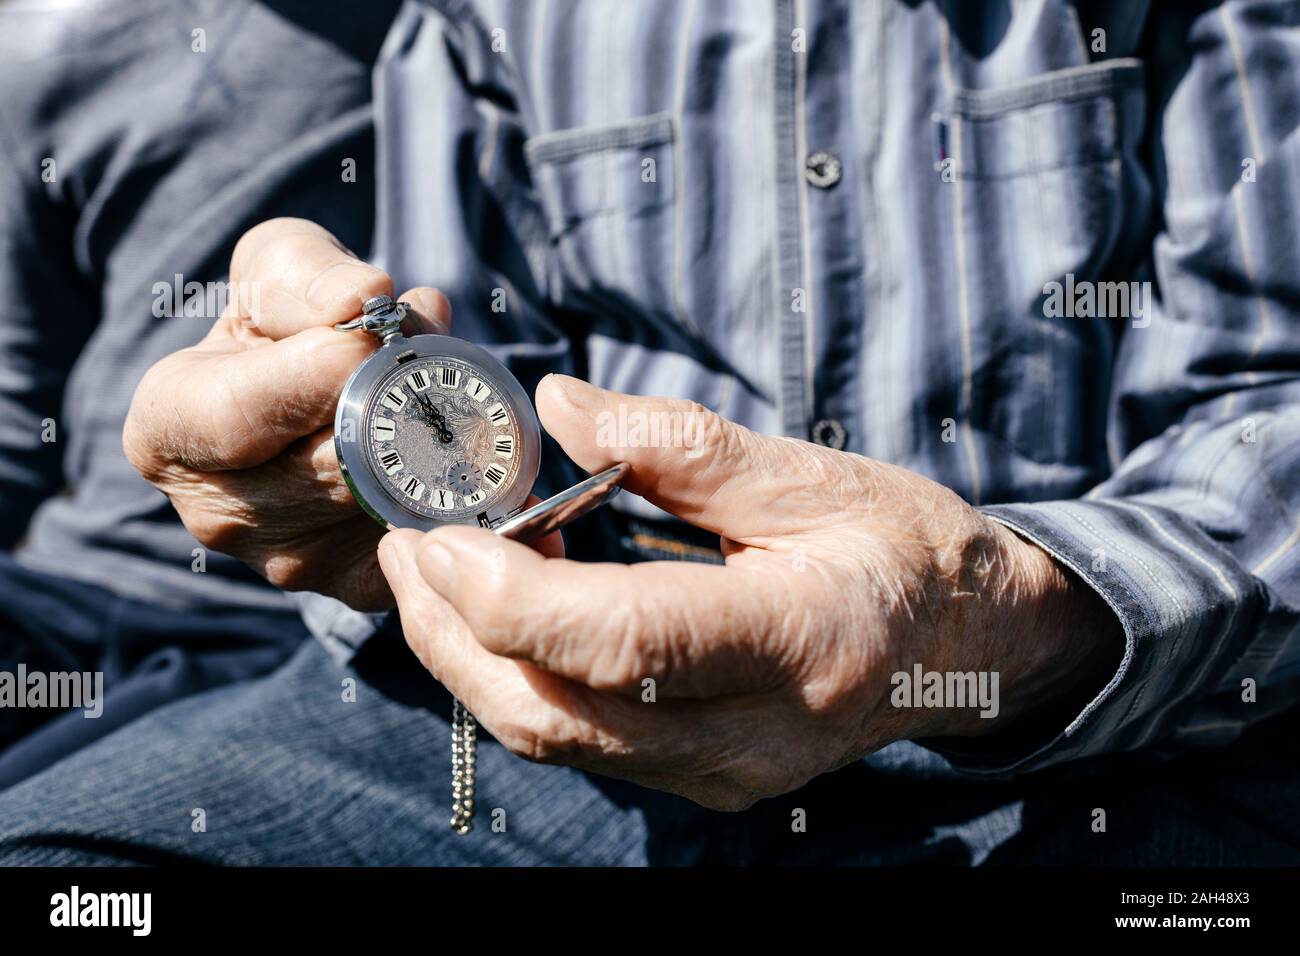 Old man's hands holding silver pocket clock, close-up Stock Photo